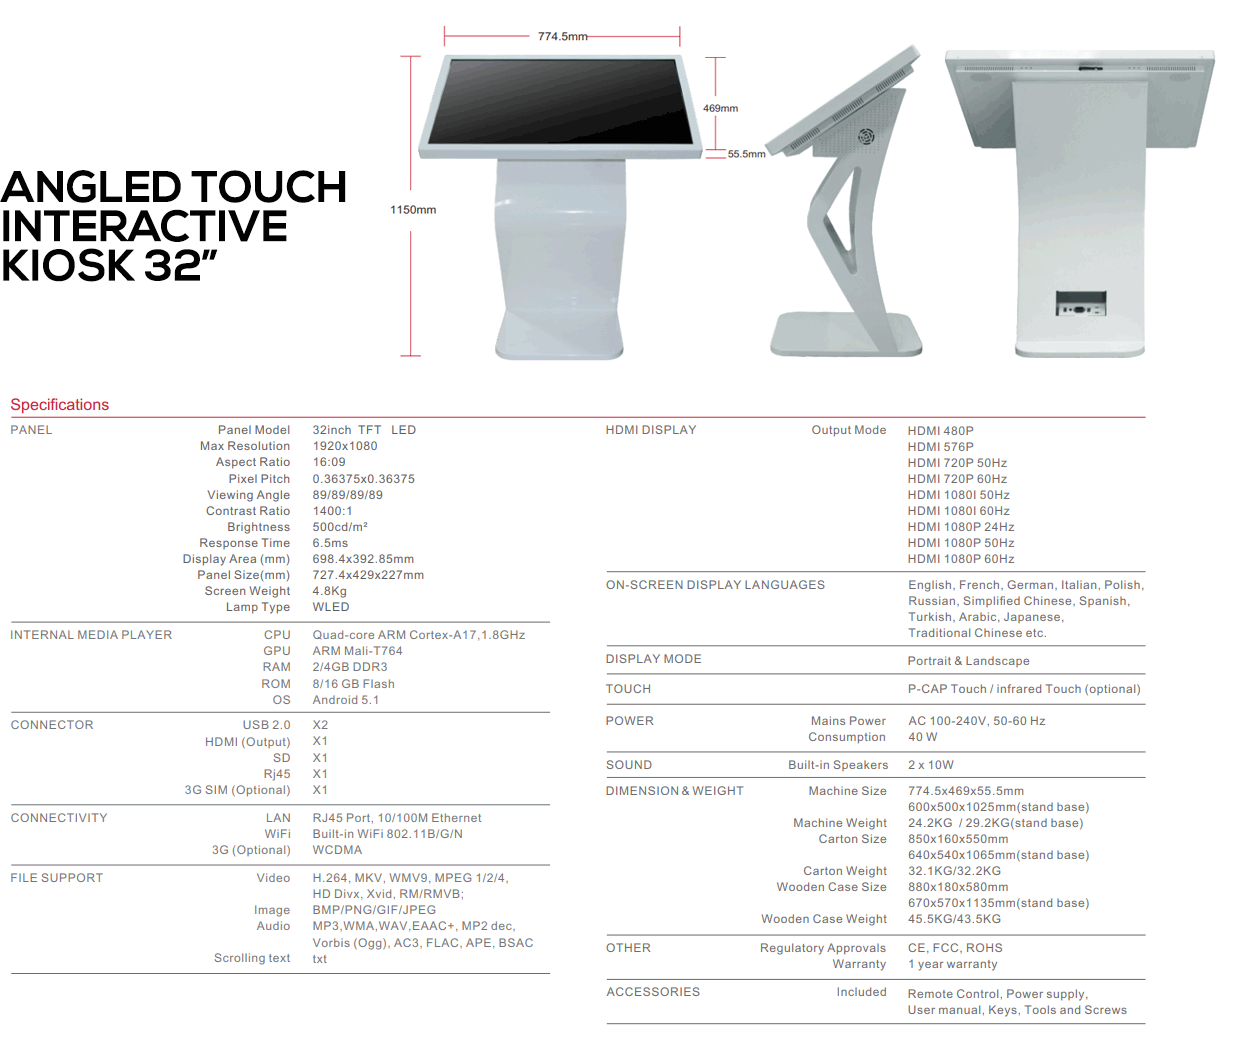 ANGLED TOUCH 32 specs